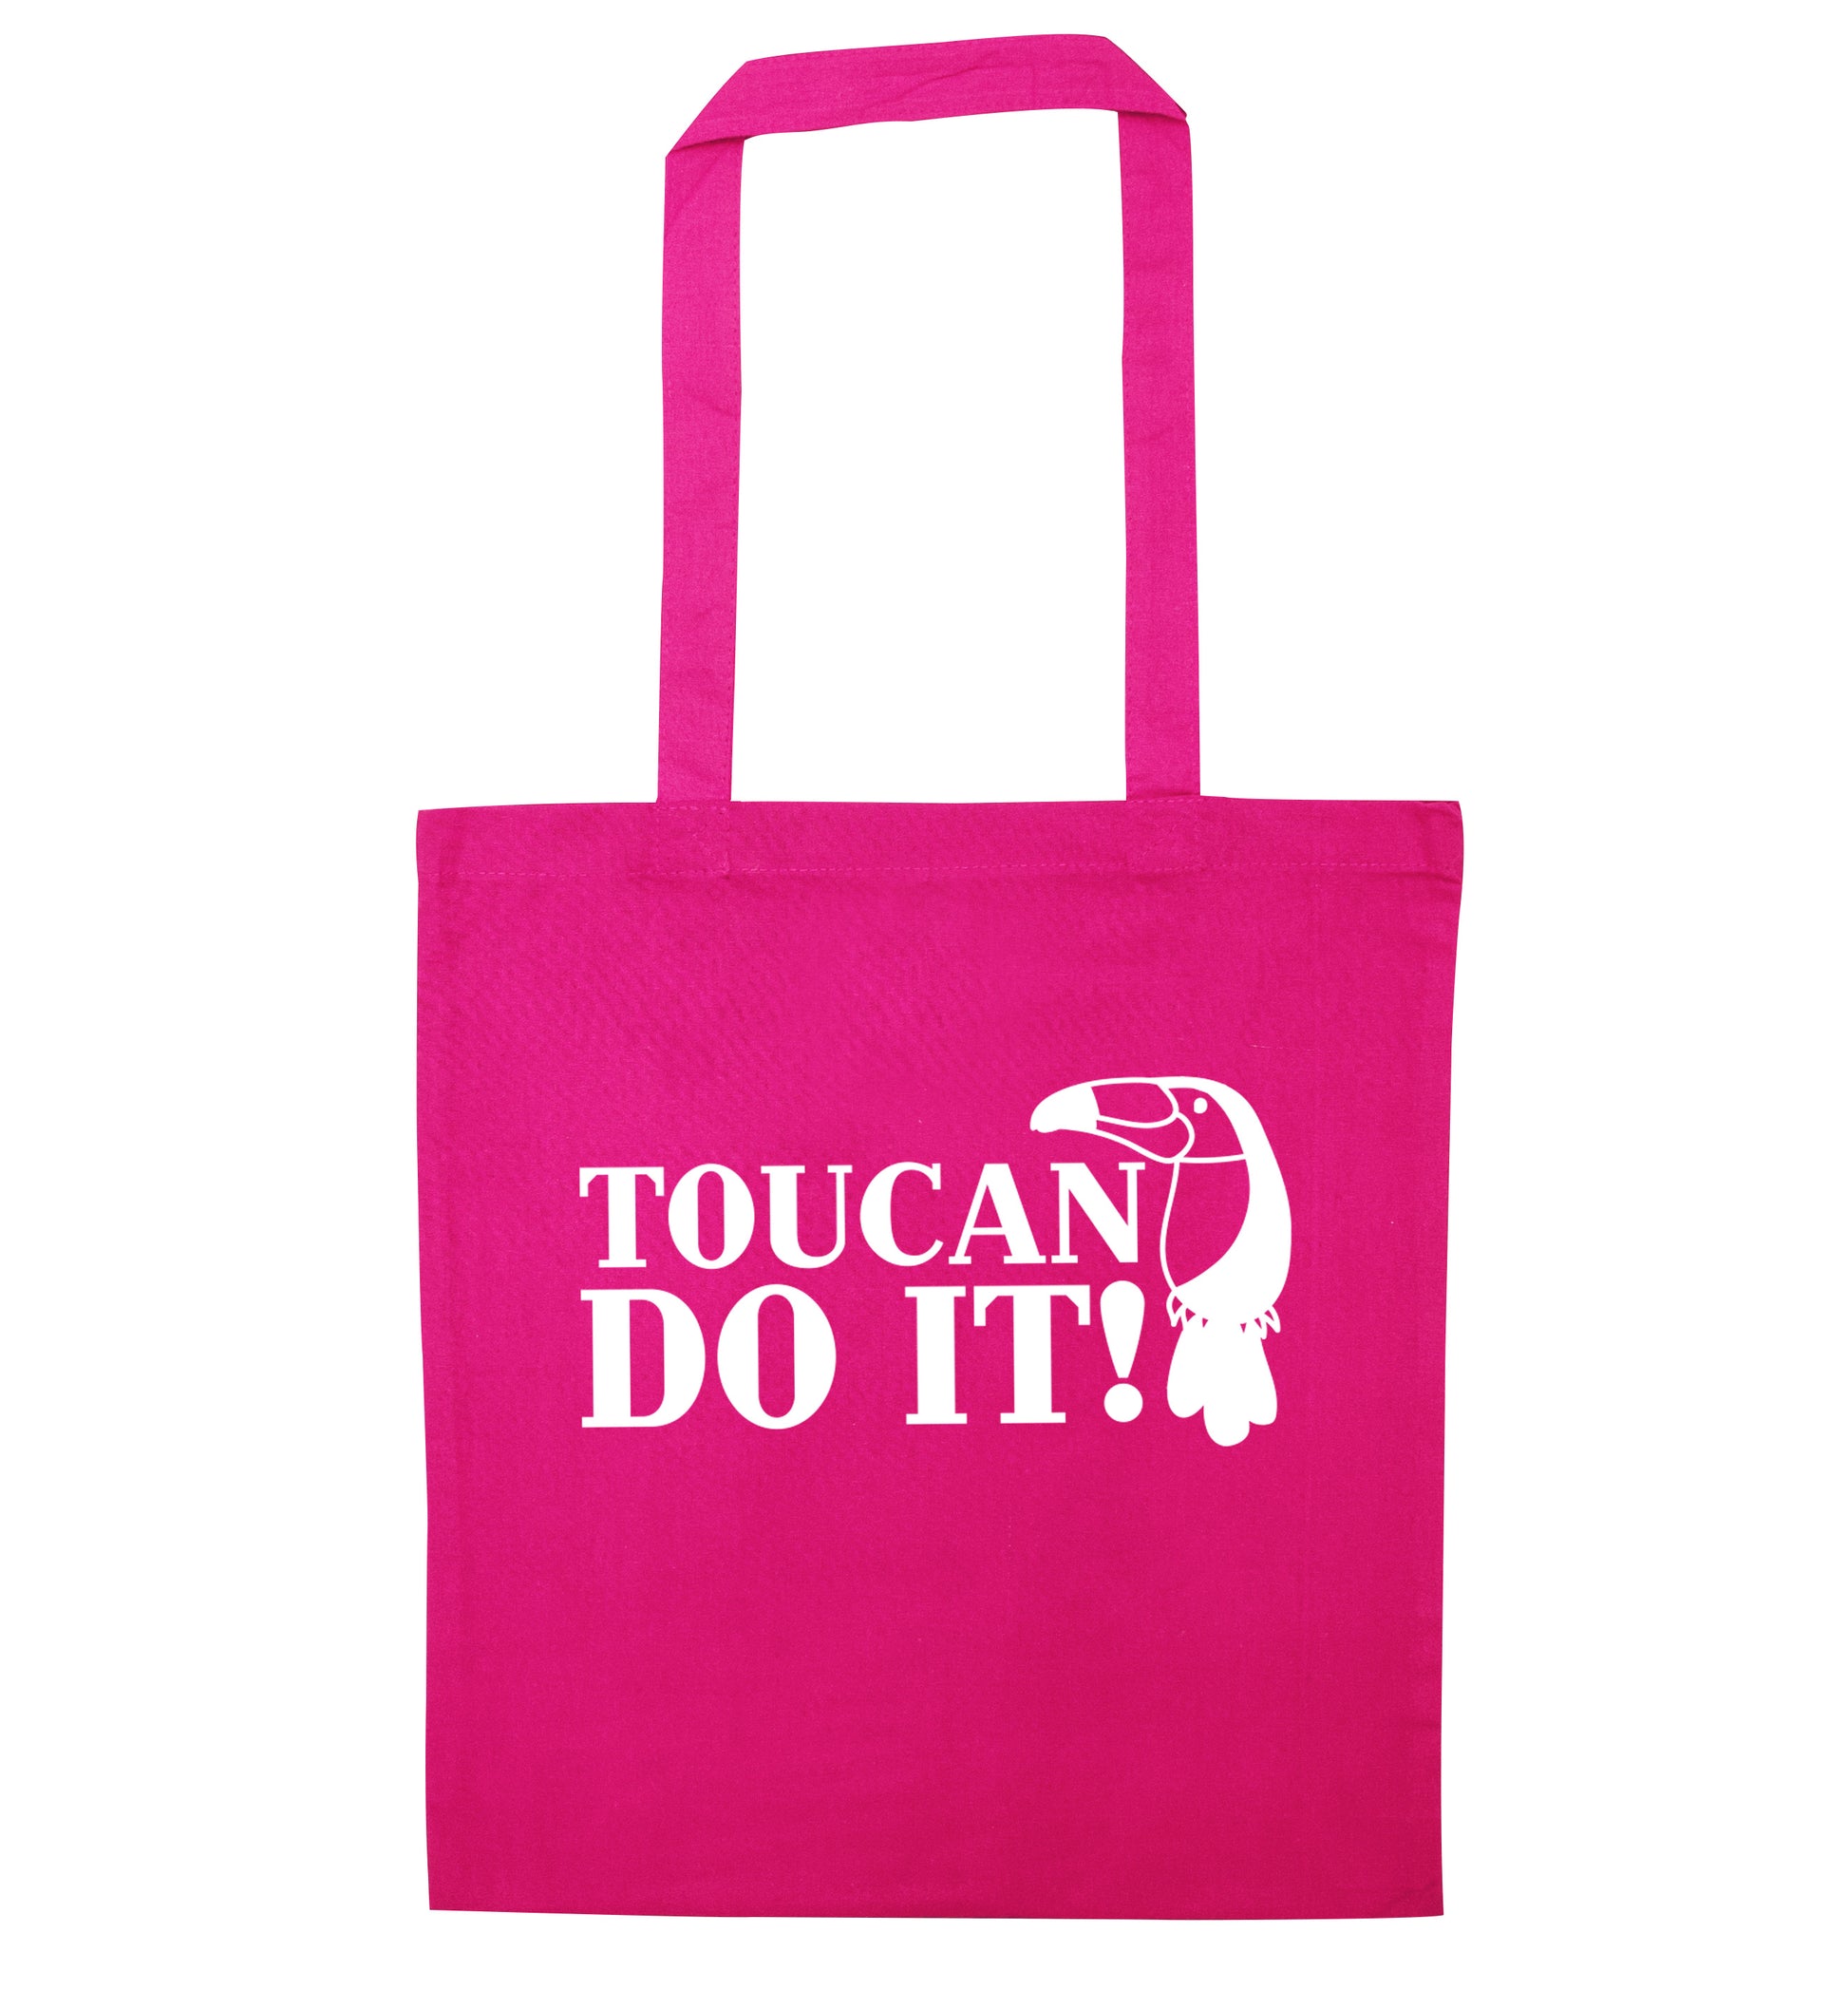 Toucan do it! pink tote bag